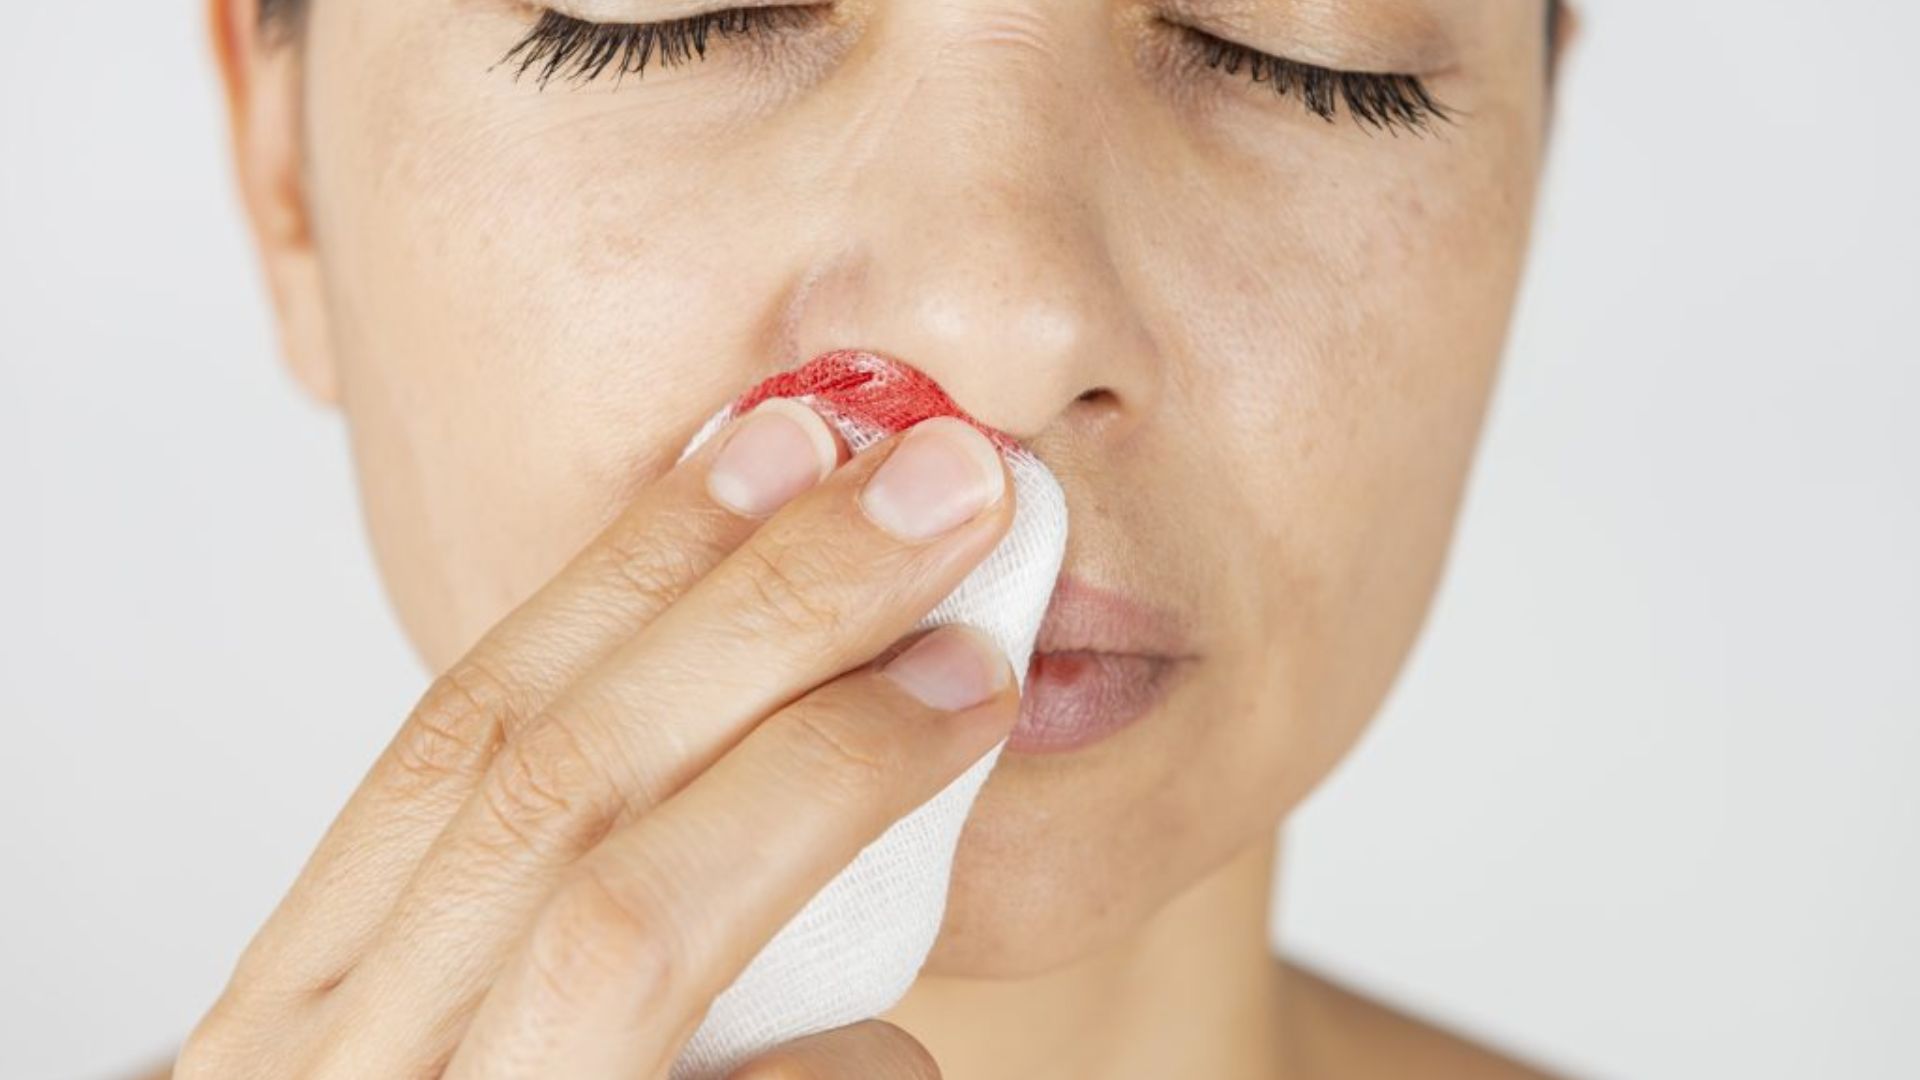 A Woman Covering Her Bleeding Nose With A Tissue